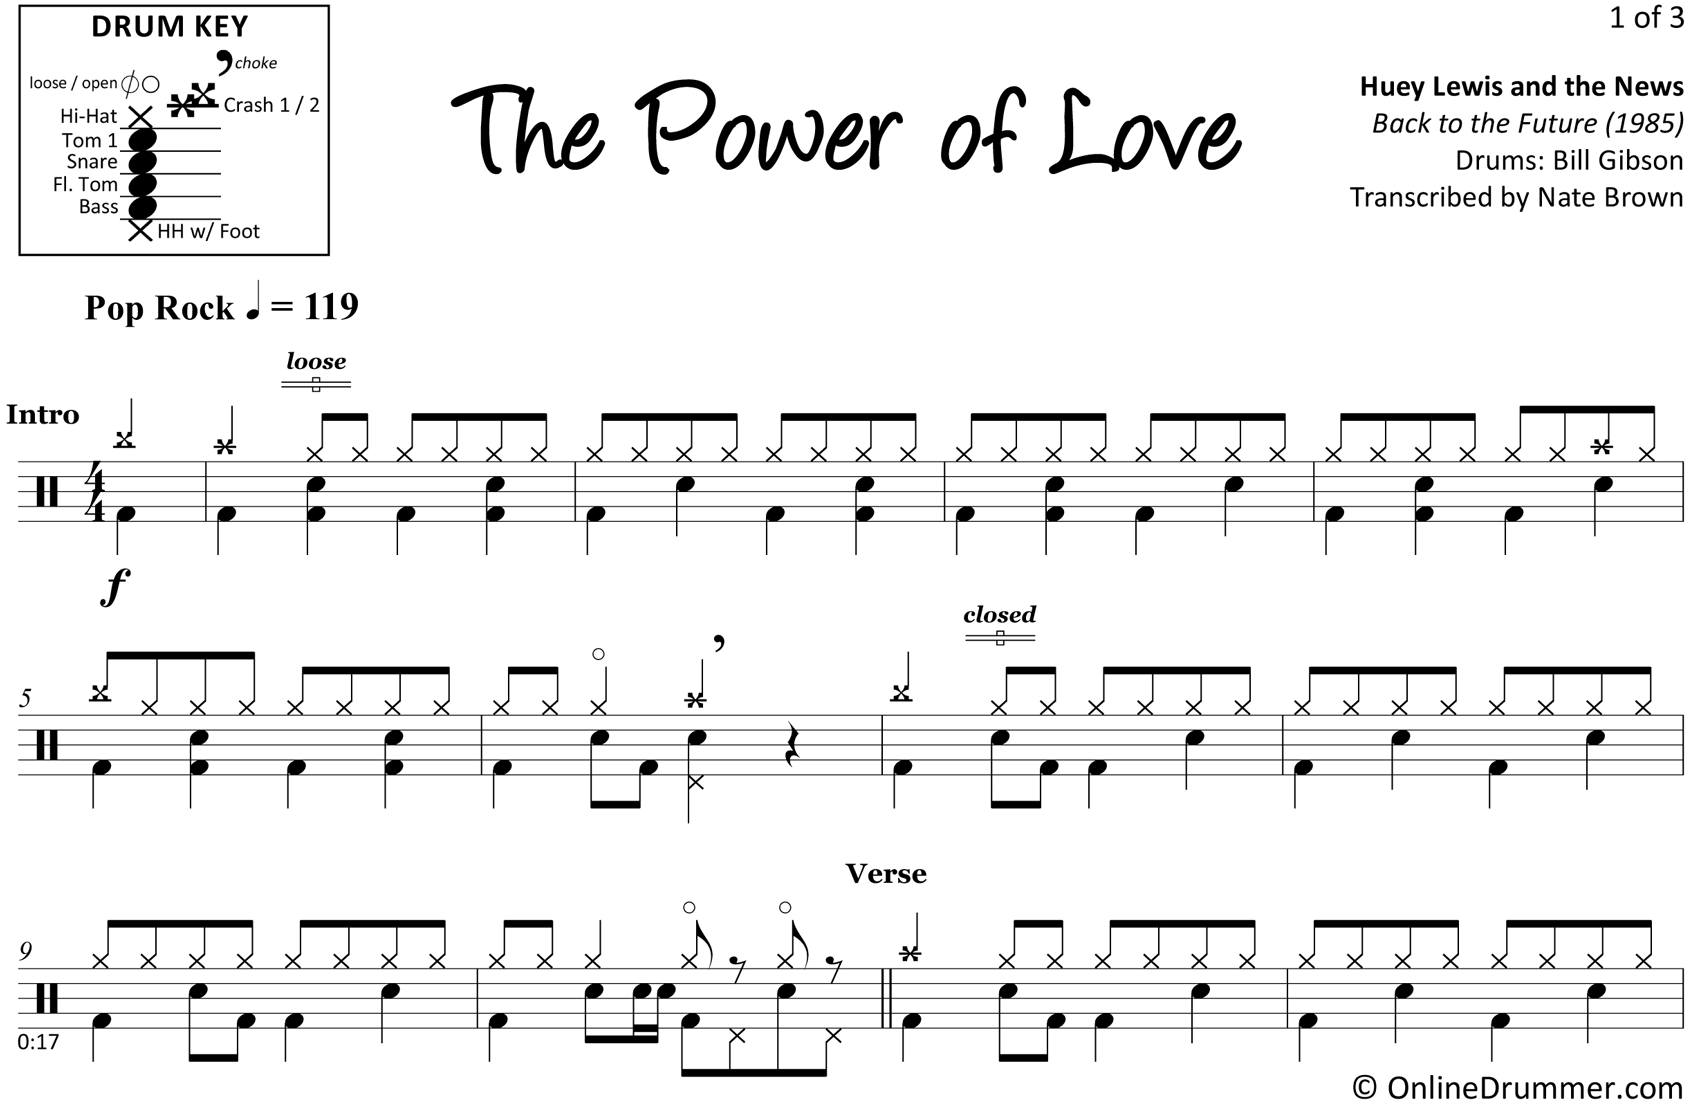 The Power of Love - Huey Lewis and the News - Drum Sheet Music